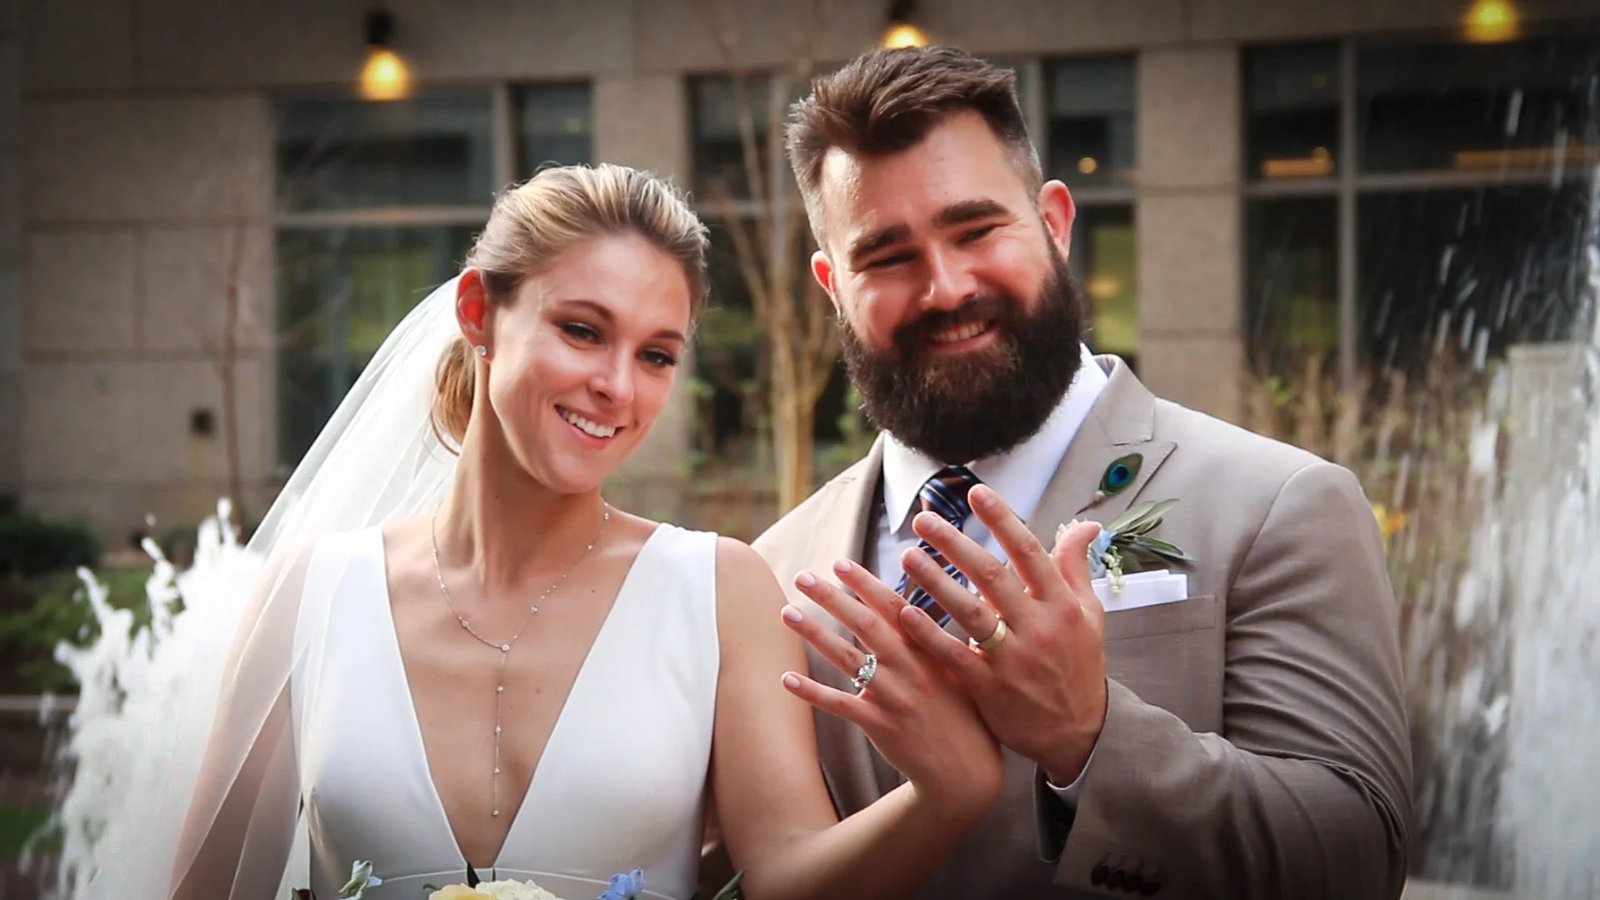 "I still want to be with you in my next life" Jason Kelce gushes over wife on their 5th Anniversary